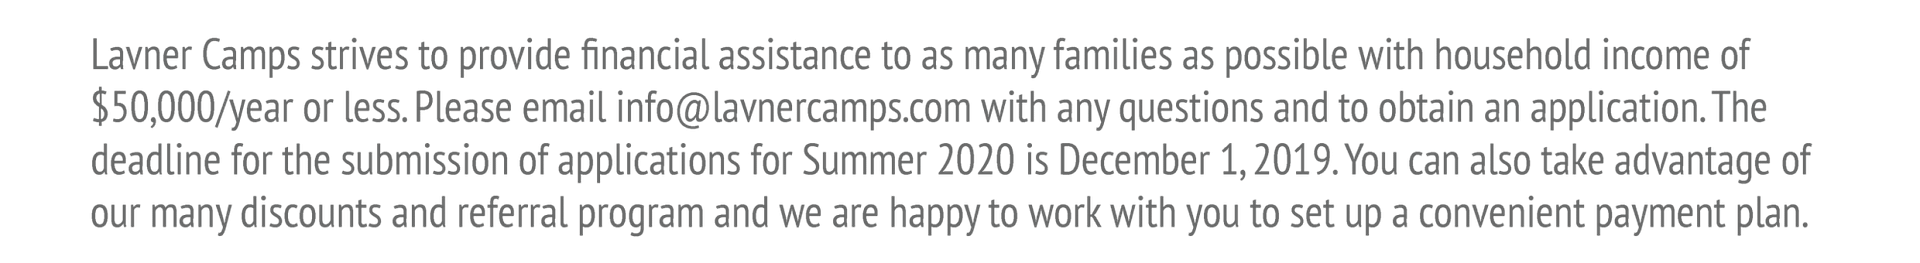 Philadelphia Summer Camps At Penn Lavner Camps 2020 Tech Camps - inappropriate transparent roblox shirt template 2020